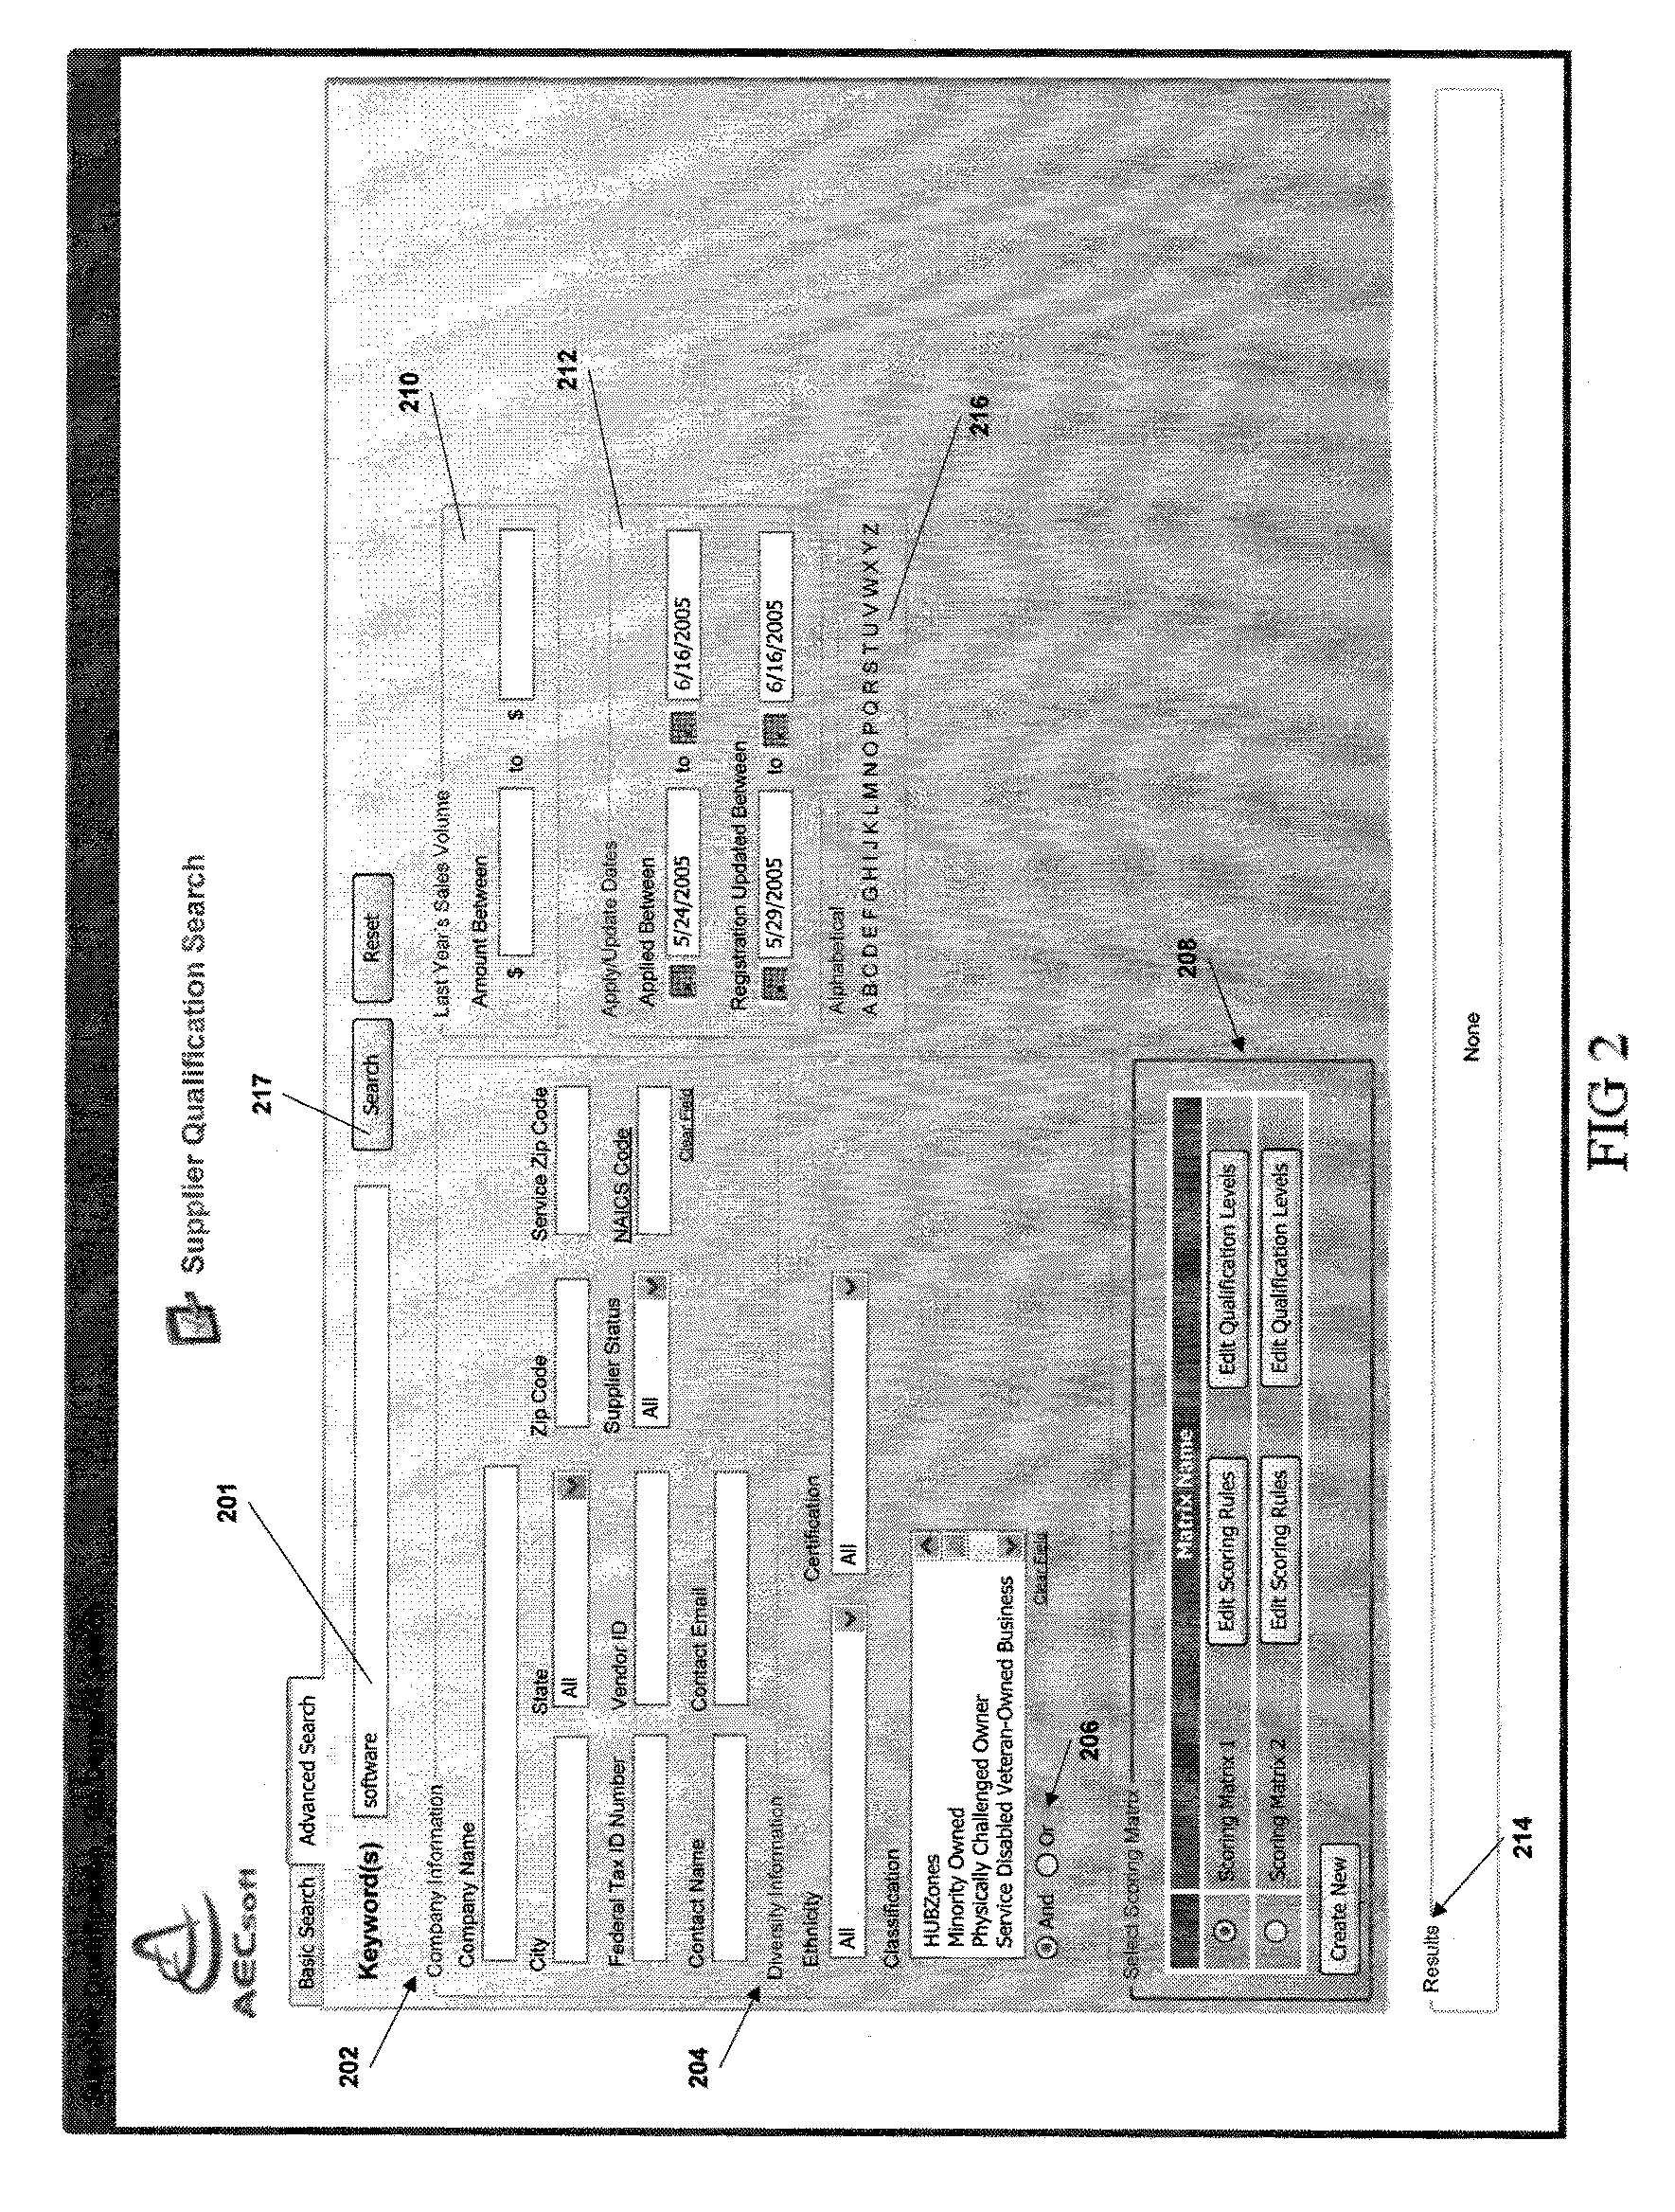 Method of scoring and automatically qualifying search results based on a pre-defined scoring matrix relating to a knowledge domain of third-parties invoking a rule construction tool to construct scoring rules to answers for questions within the knowledge domain